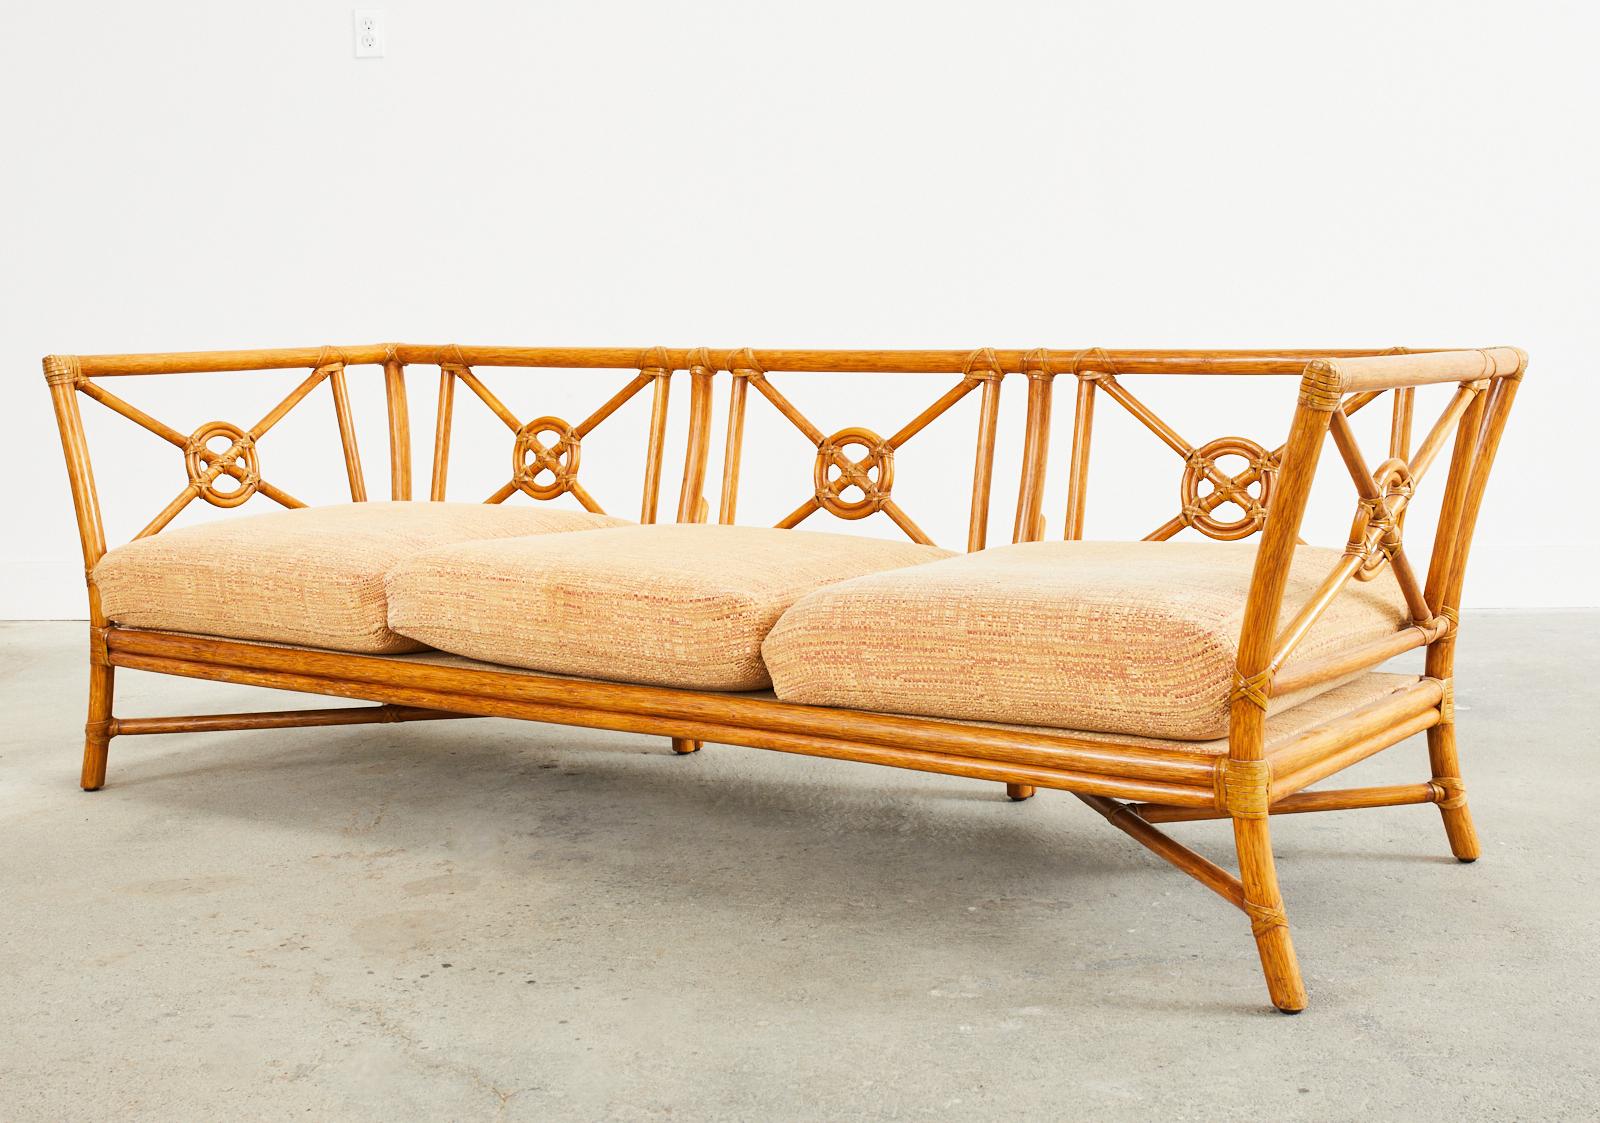 Genuine McGuire rattan sofa or daybed made in the California organic modern style. The sofa features a target motif design back and sides designed by Elinor McGuire. Constructed with thick rattan poles the frame has a beautifully waisted form that